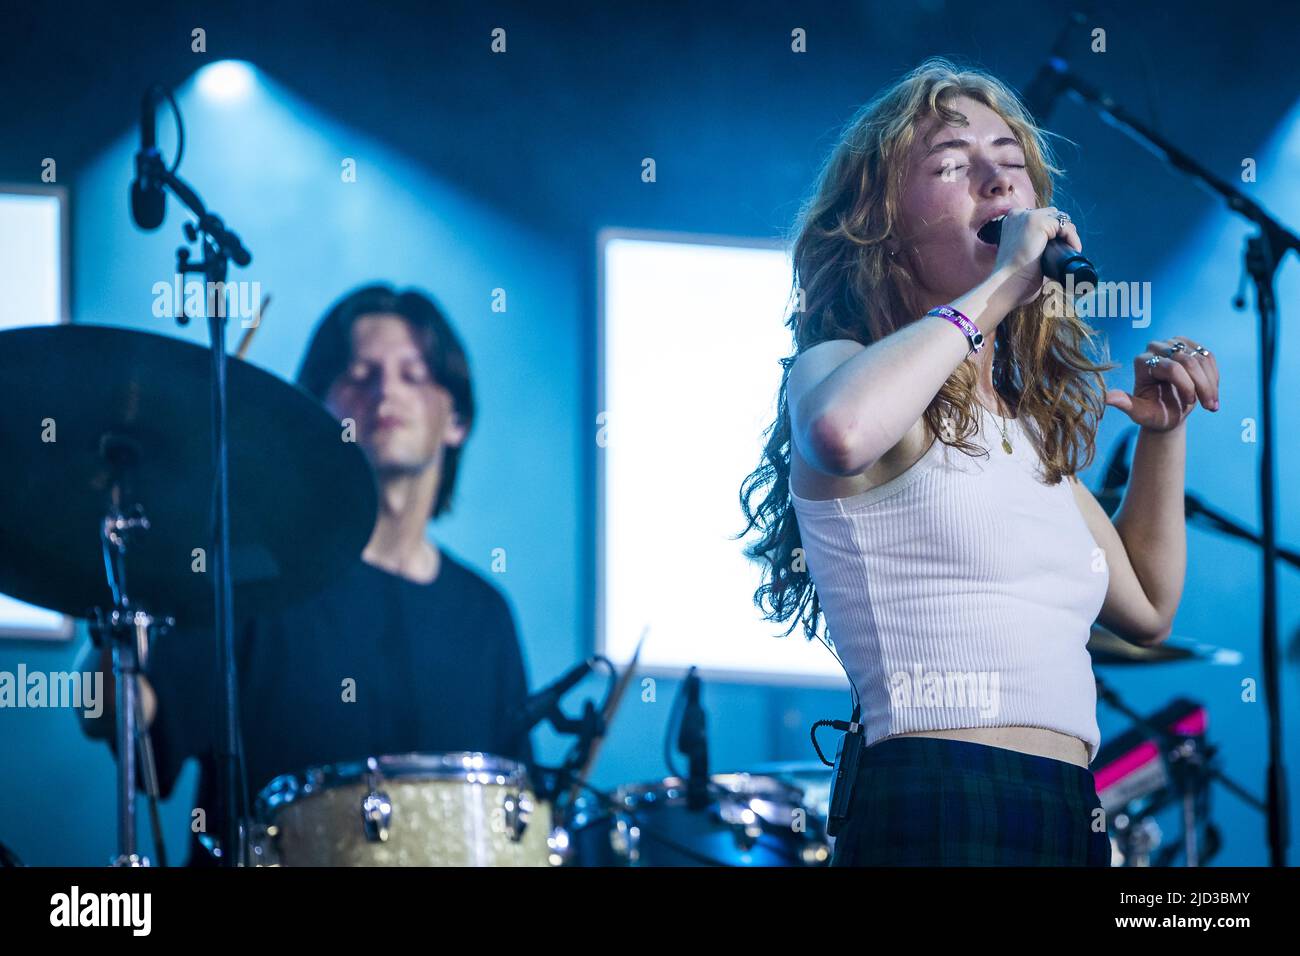 Landgraaf, Belgium. 17th June, 2022. 2022-06-17 18:39:08 LANDGRAAF - Froukje will perform during the first day of the Pinkpop music festival. ANP MARCEL VAN HOORN netherlands out - belgium out Credit: ANP/Alamy Live News Stock Photo